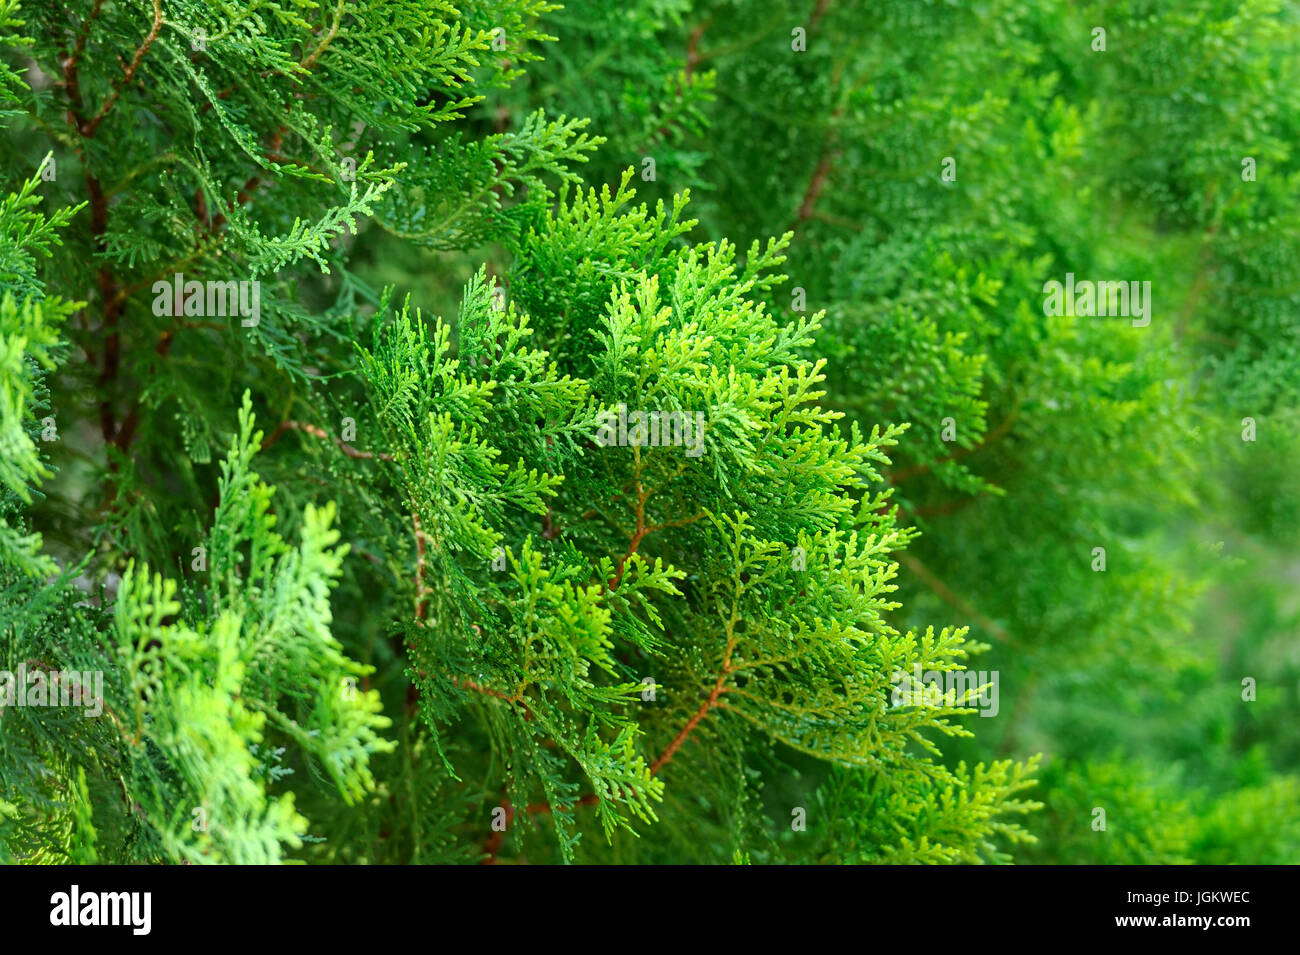 Green Thuja hedge texture close-up view Stock Photo